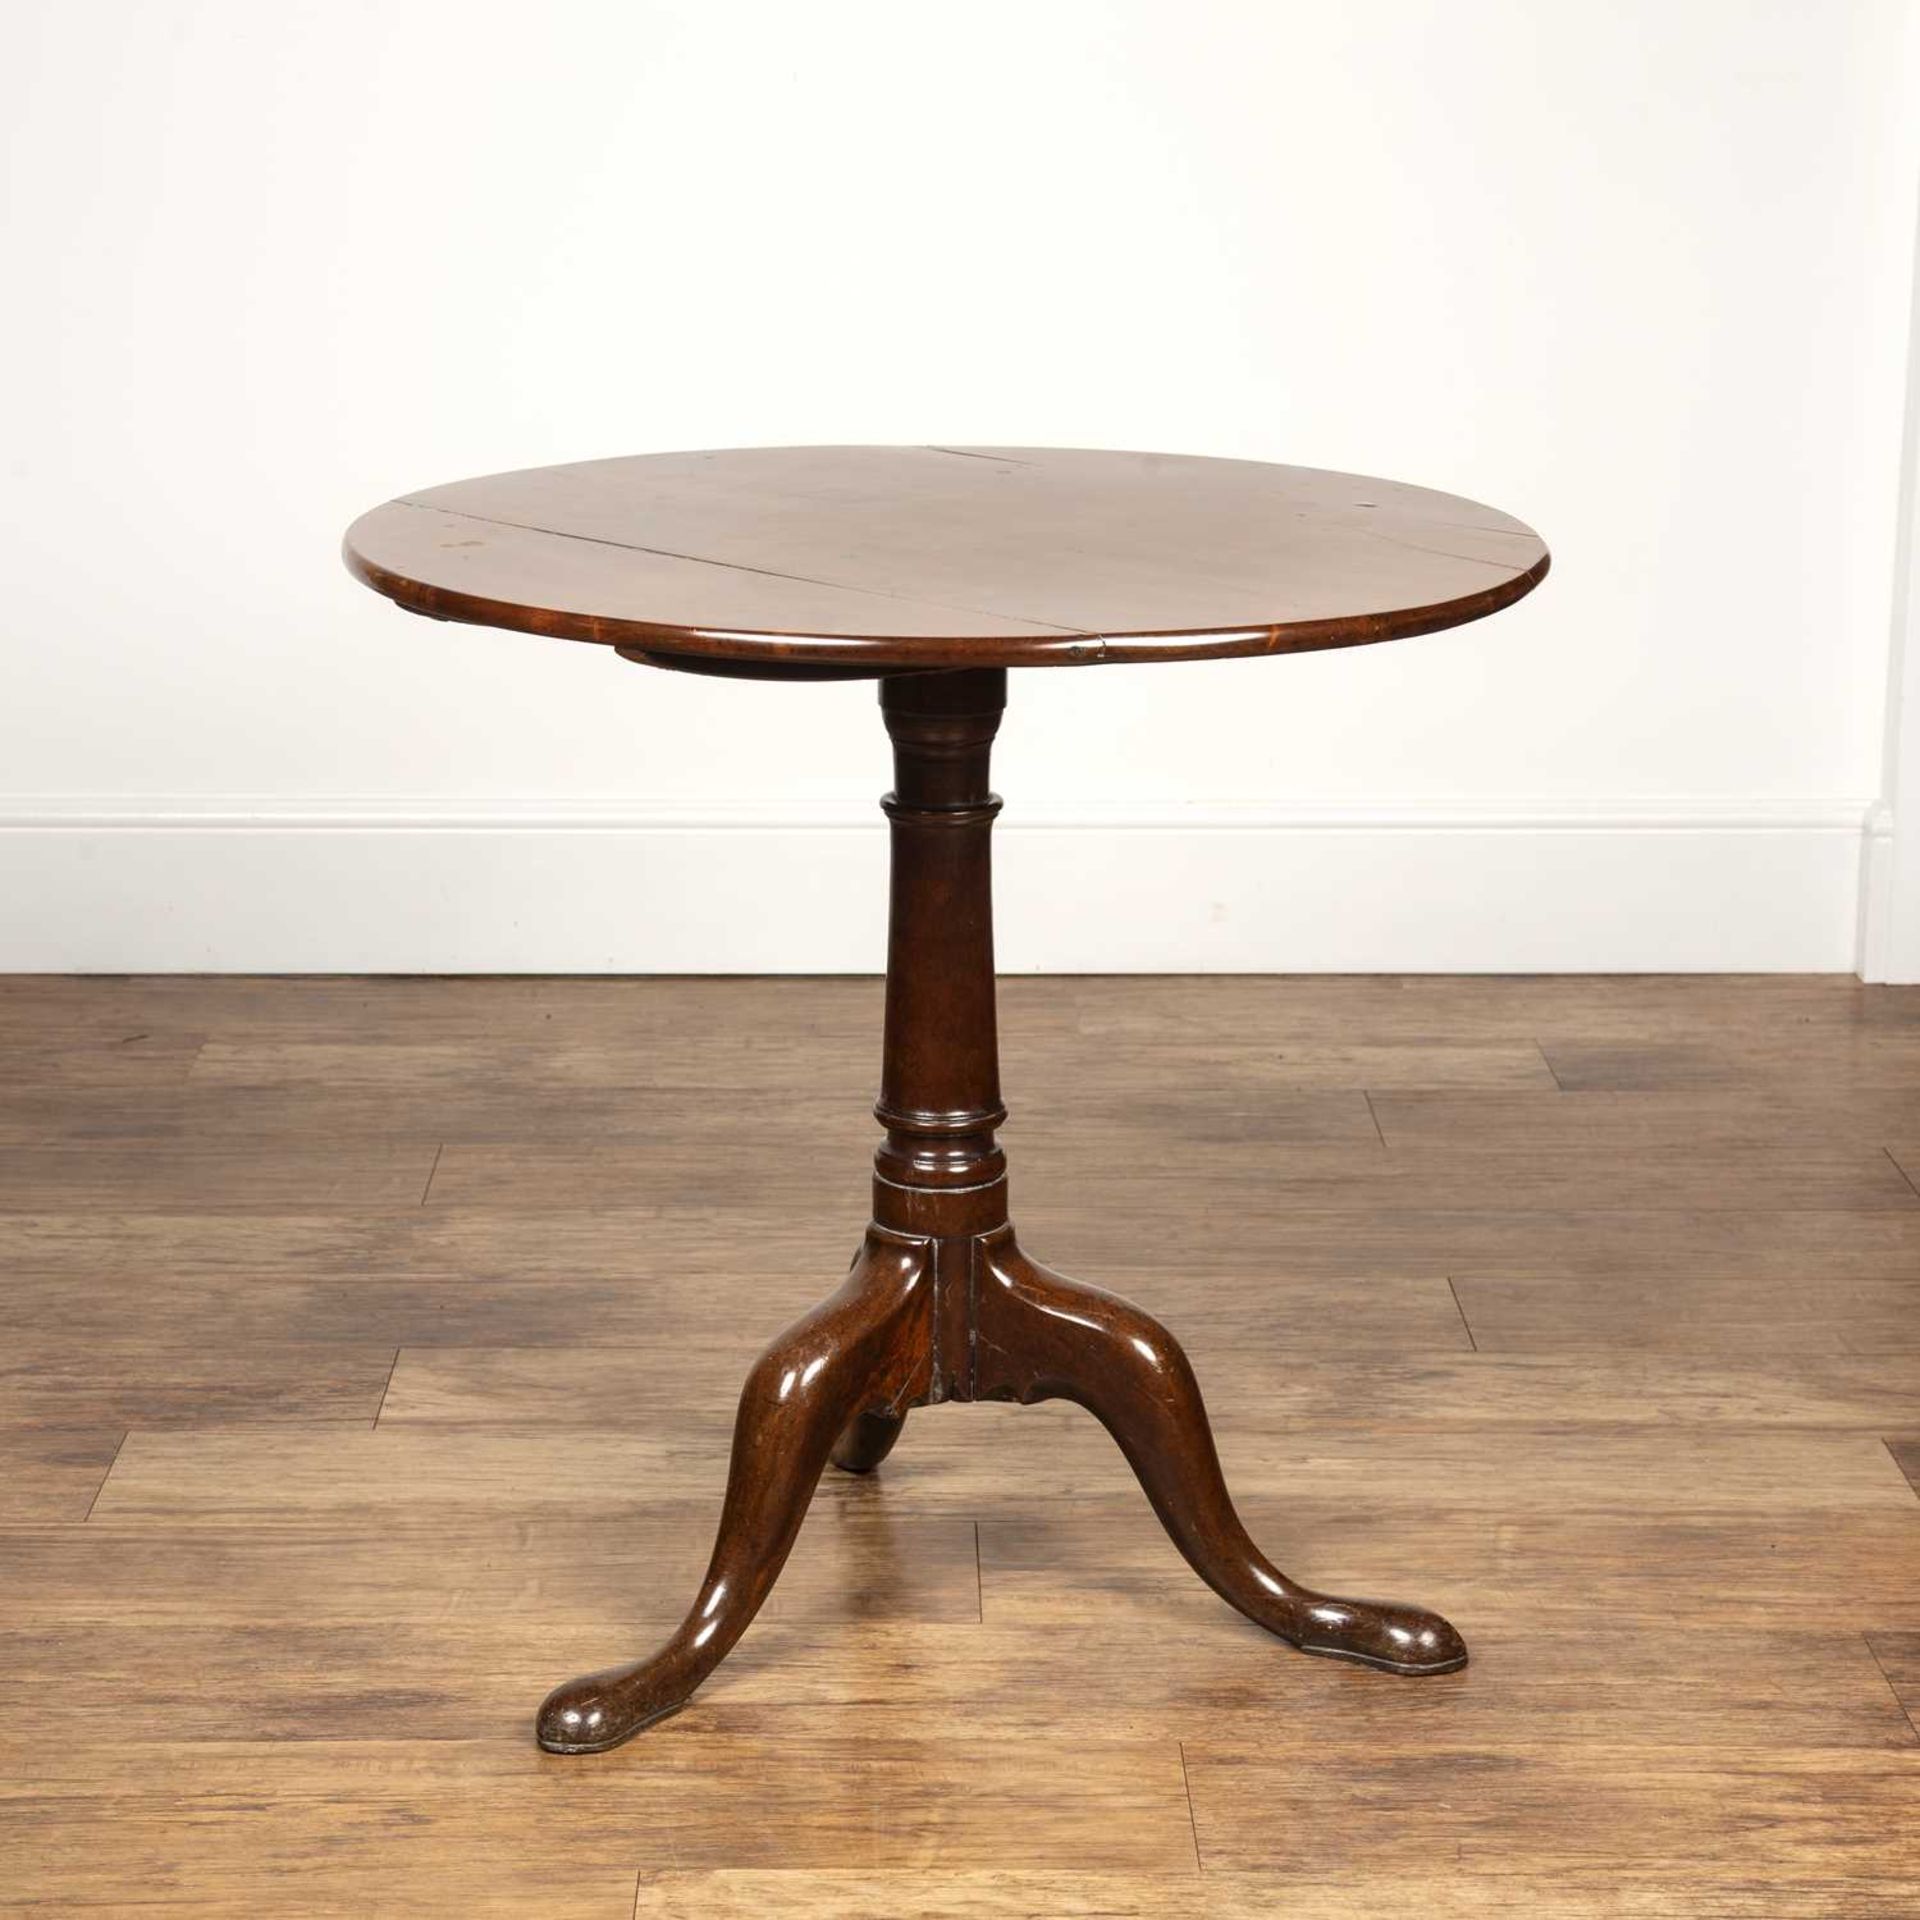 Yewood tilt top tripod table late 18th/early 19th Century, with circular top, 70.5cm wide x 69cm